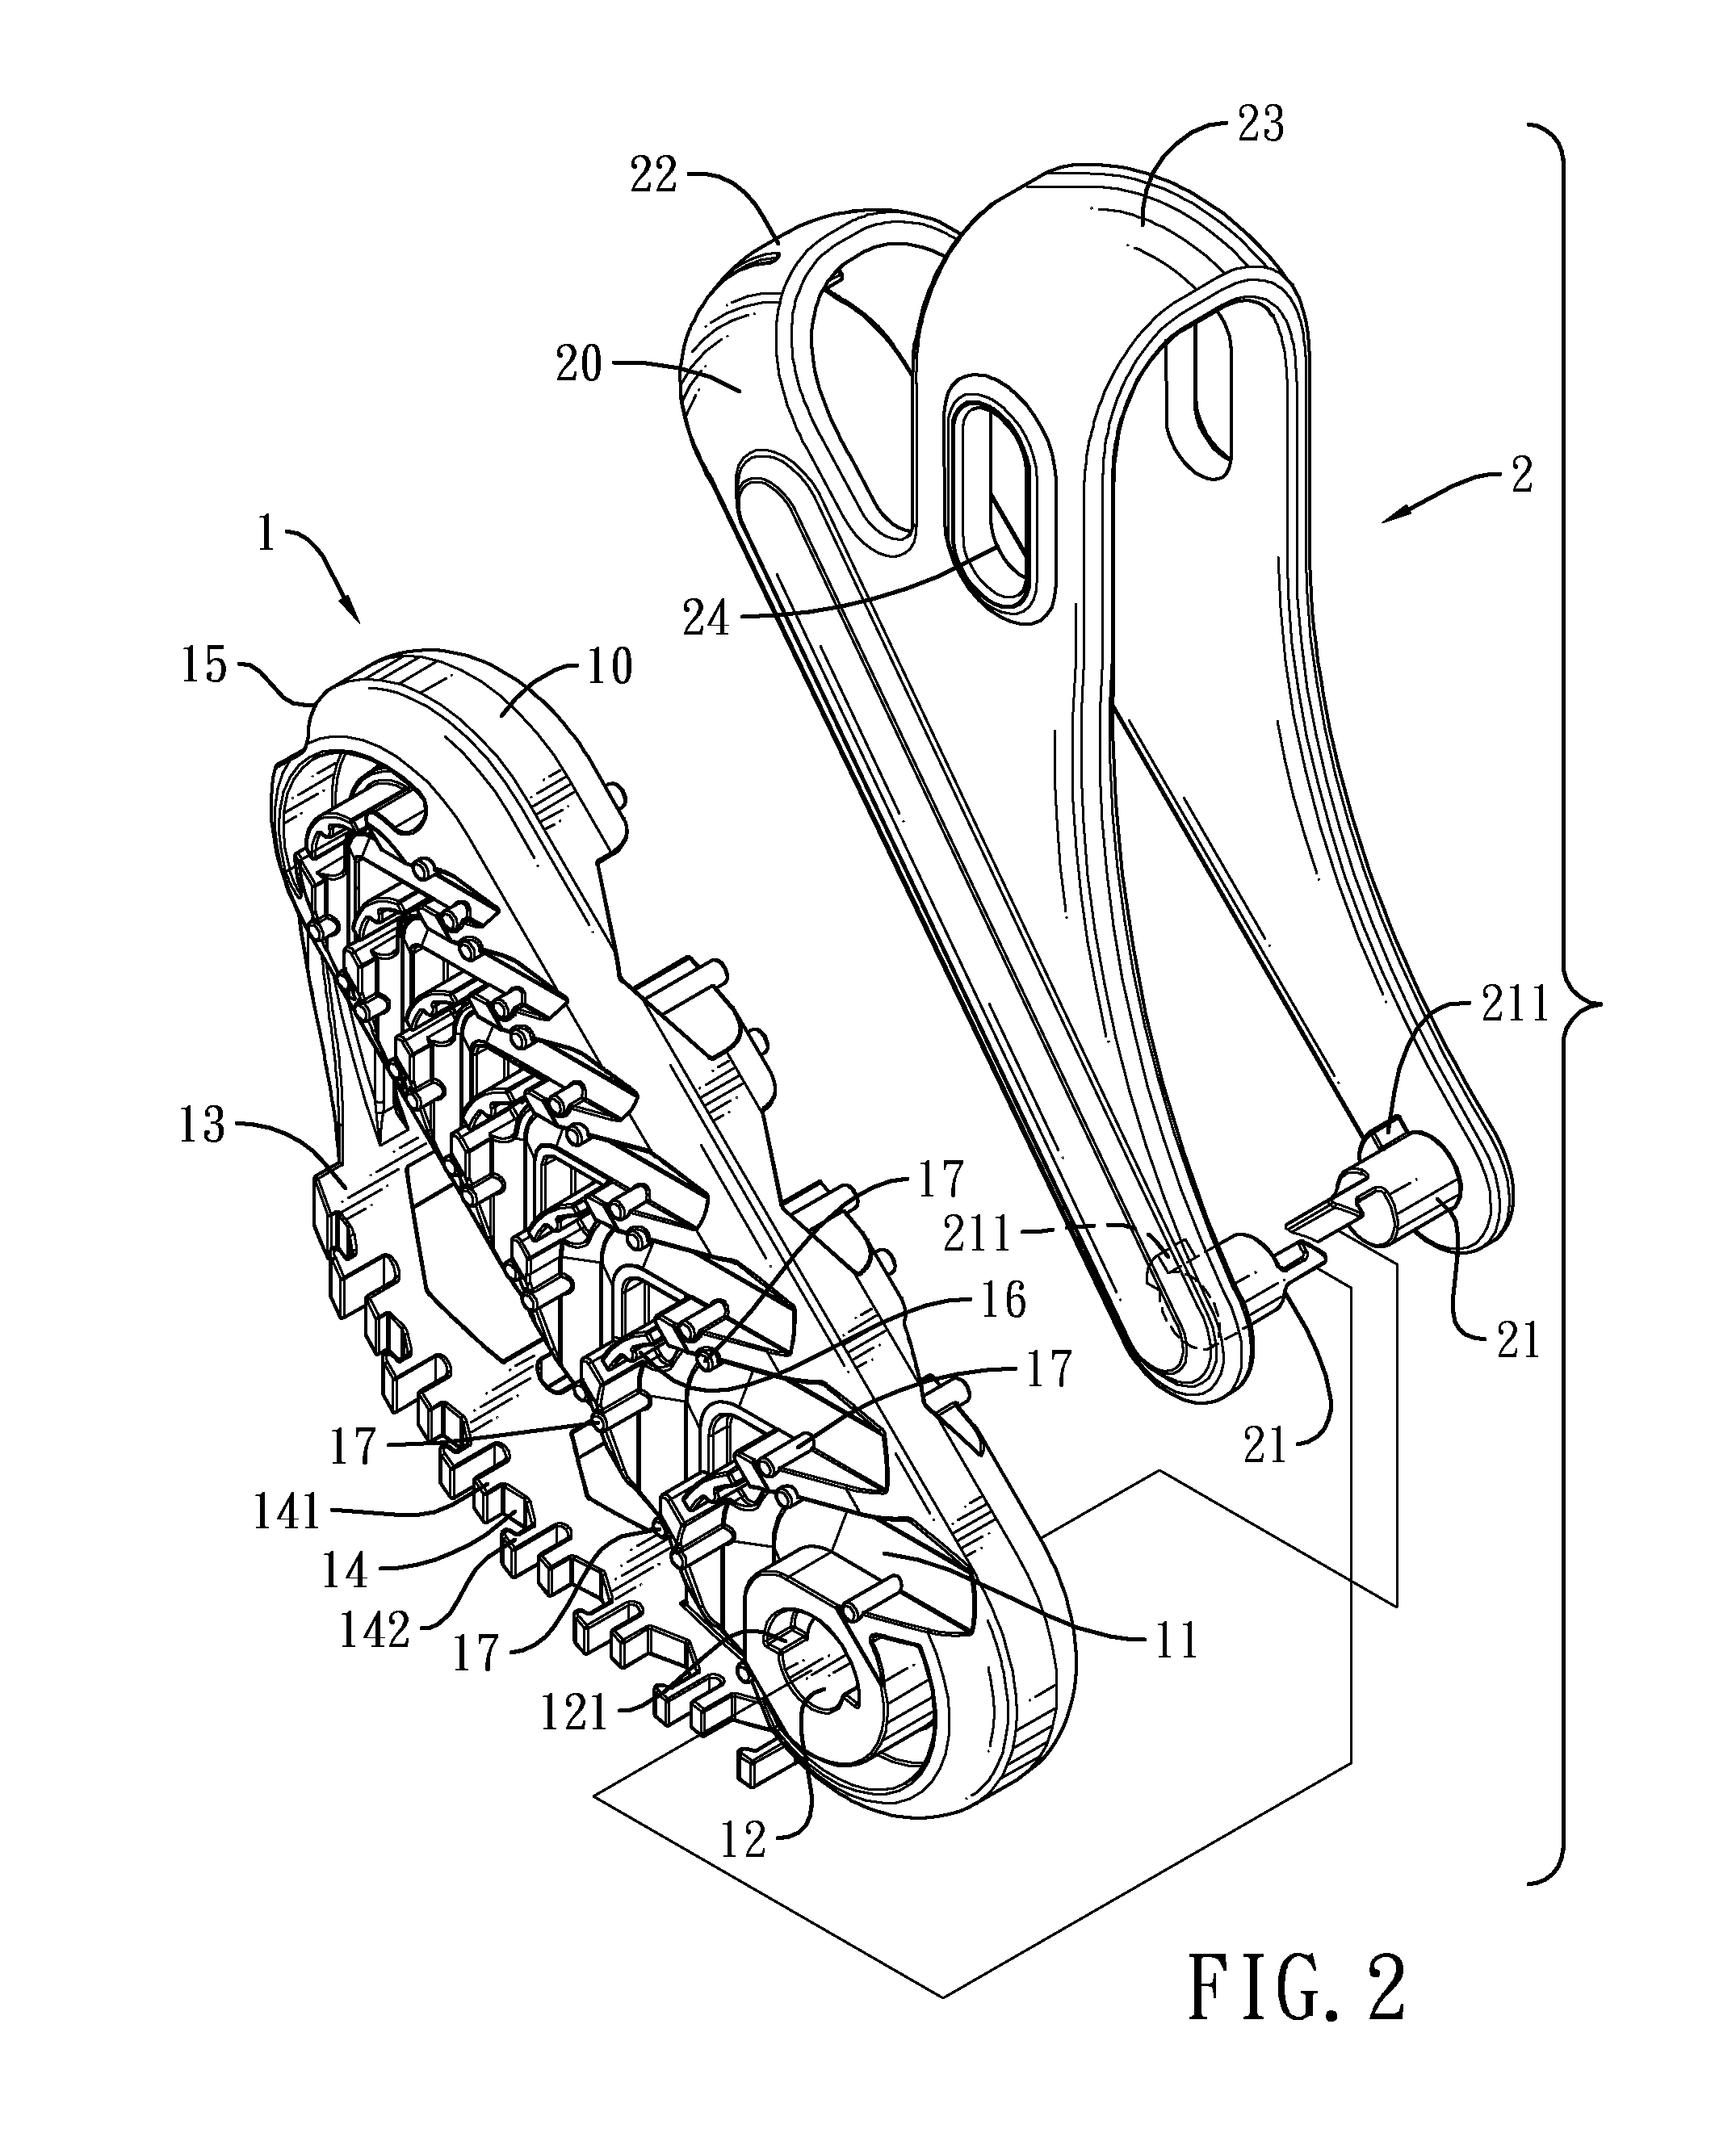 Hexagonal wrench holding assembly